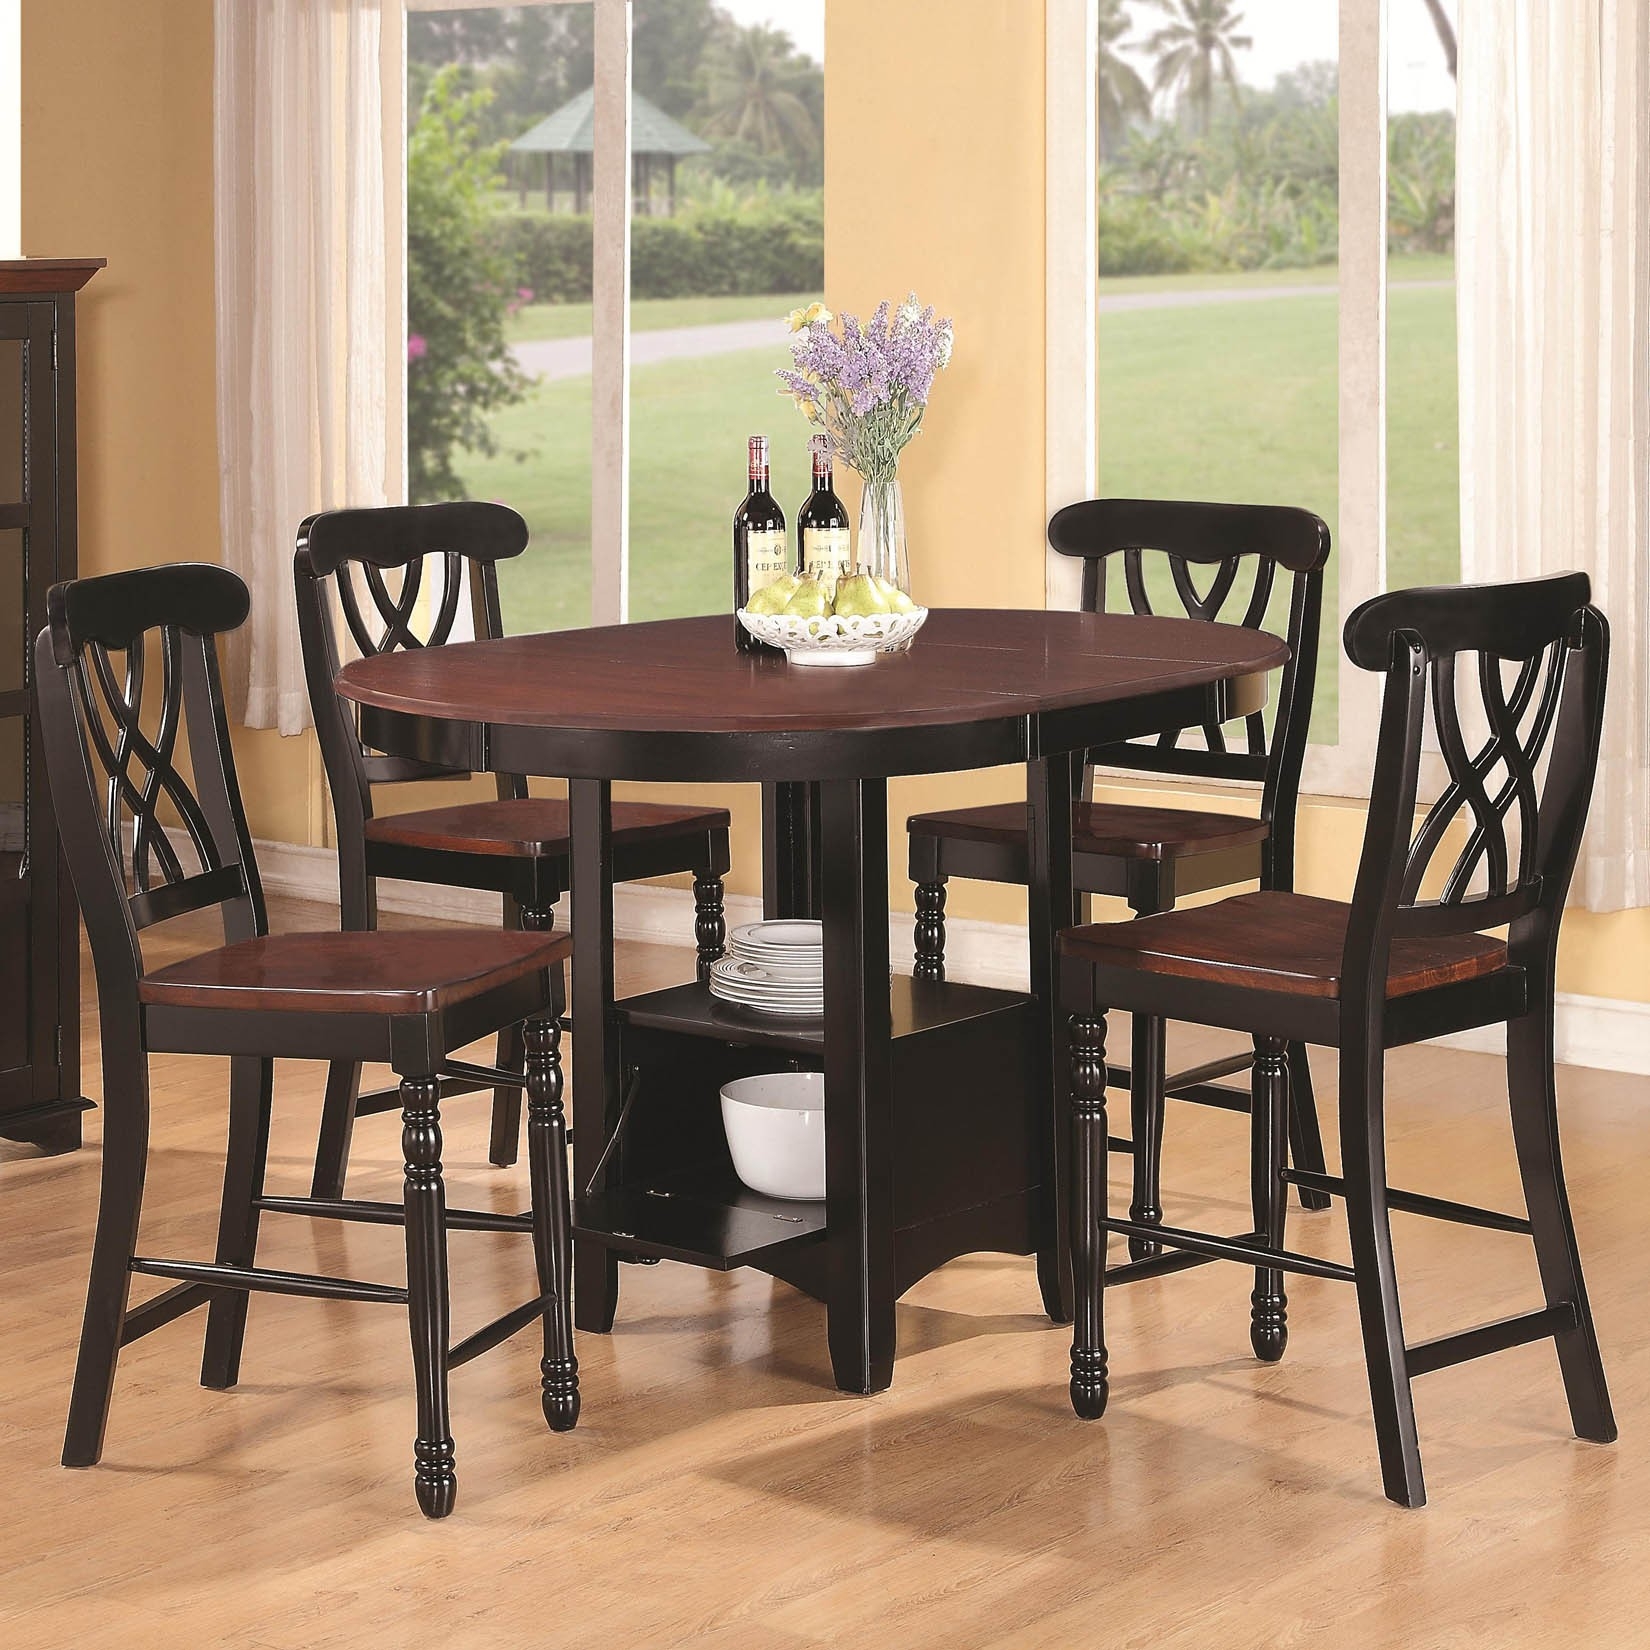 Counter height dining set with leaf